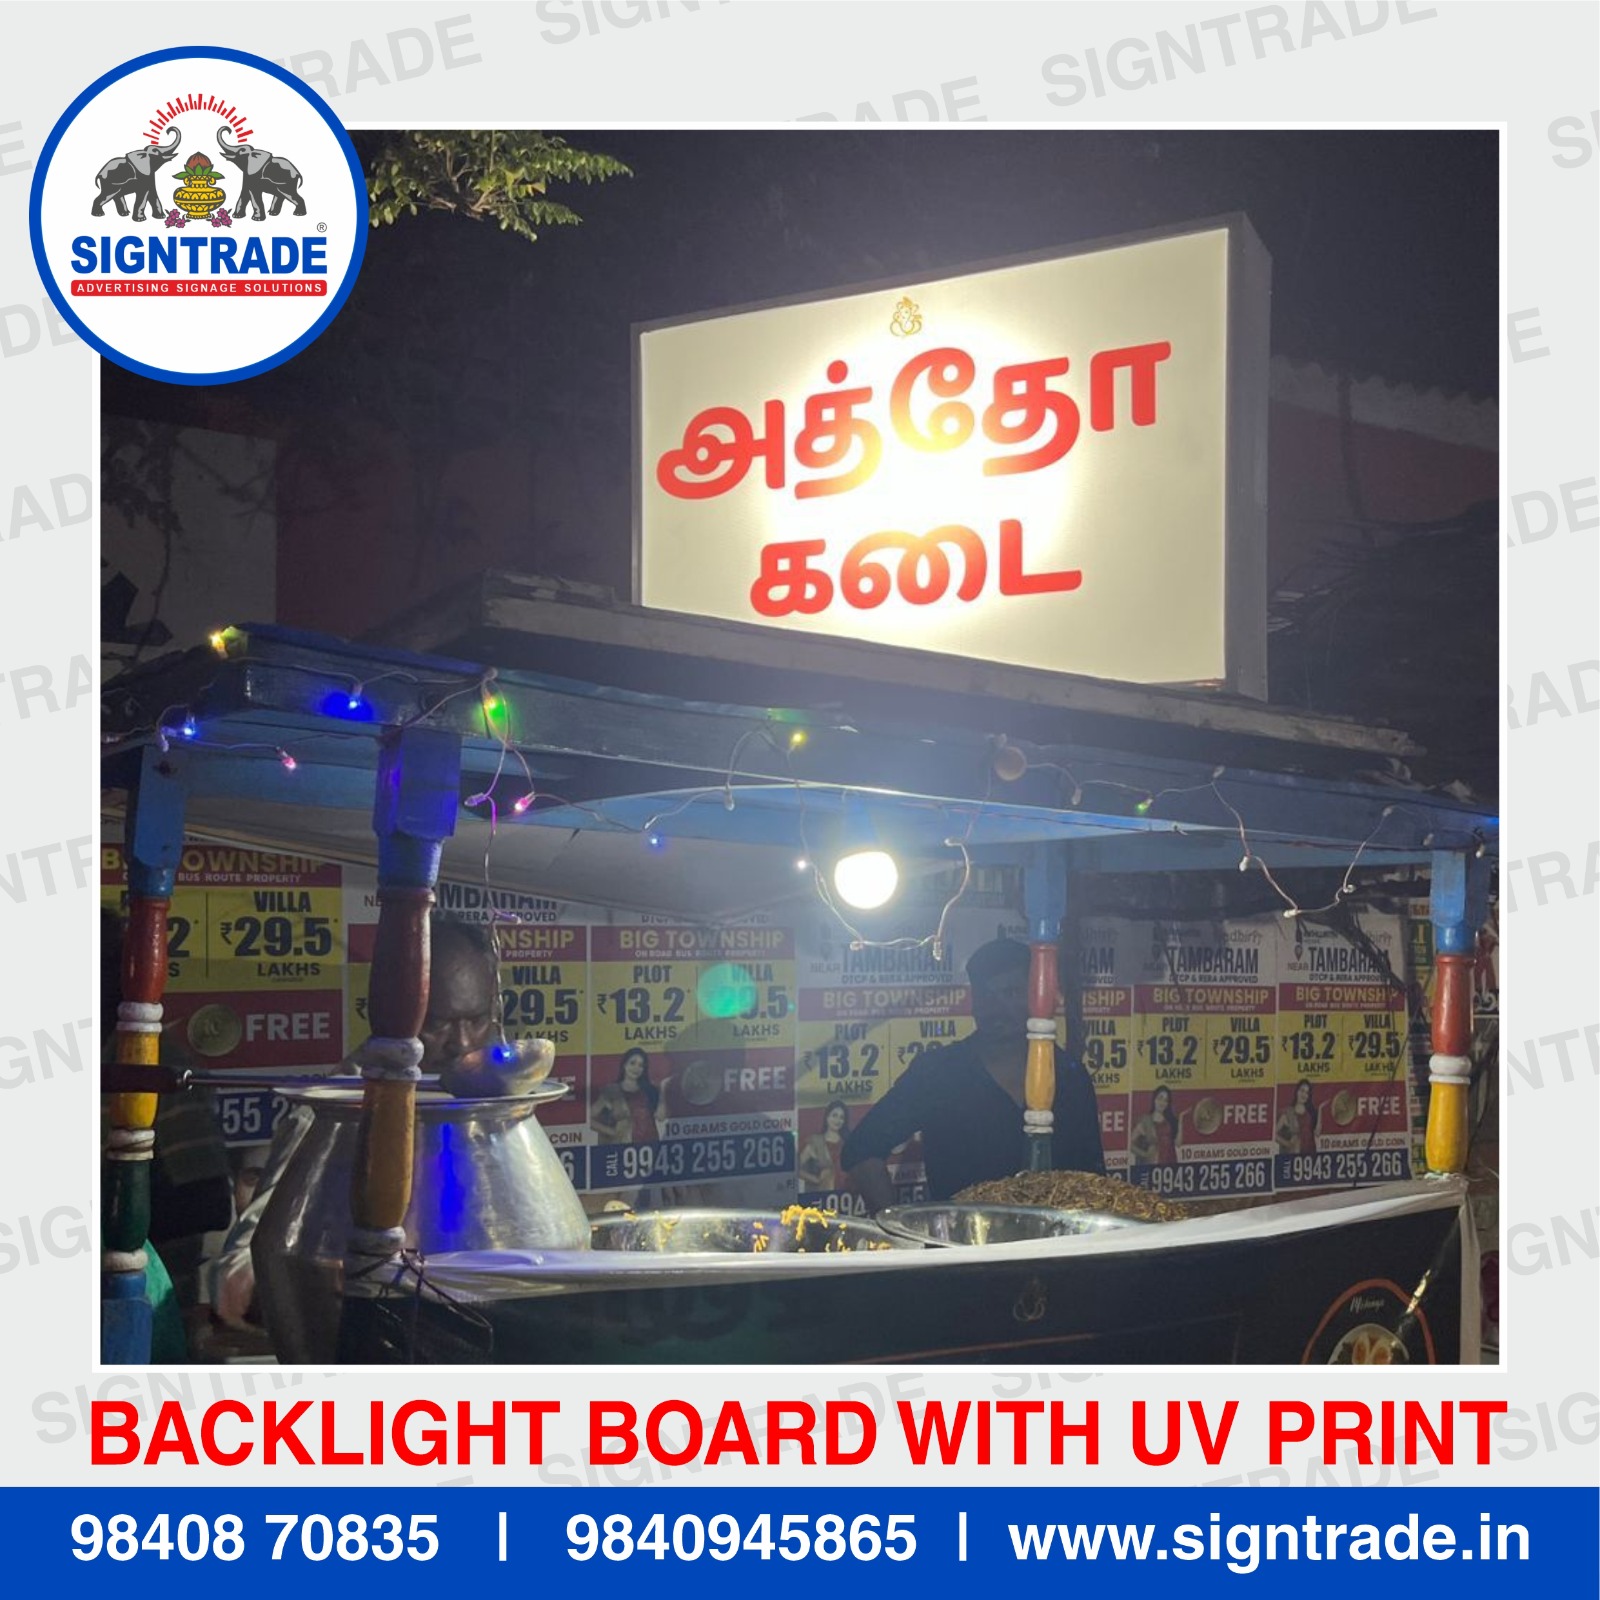 UV print with LED Backlight Boards in Chennai